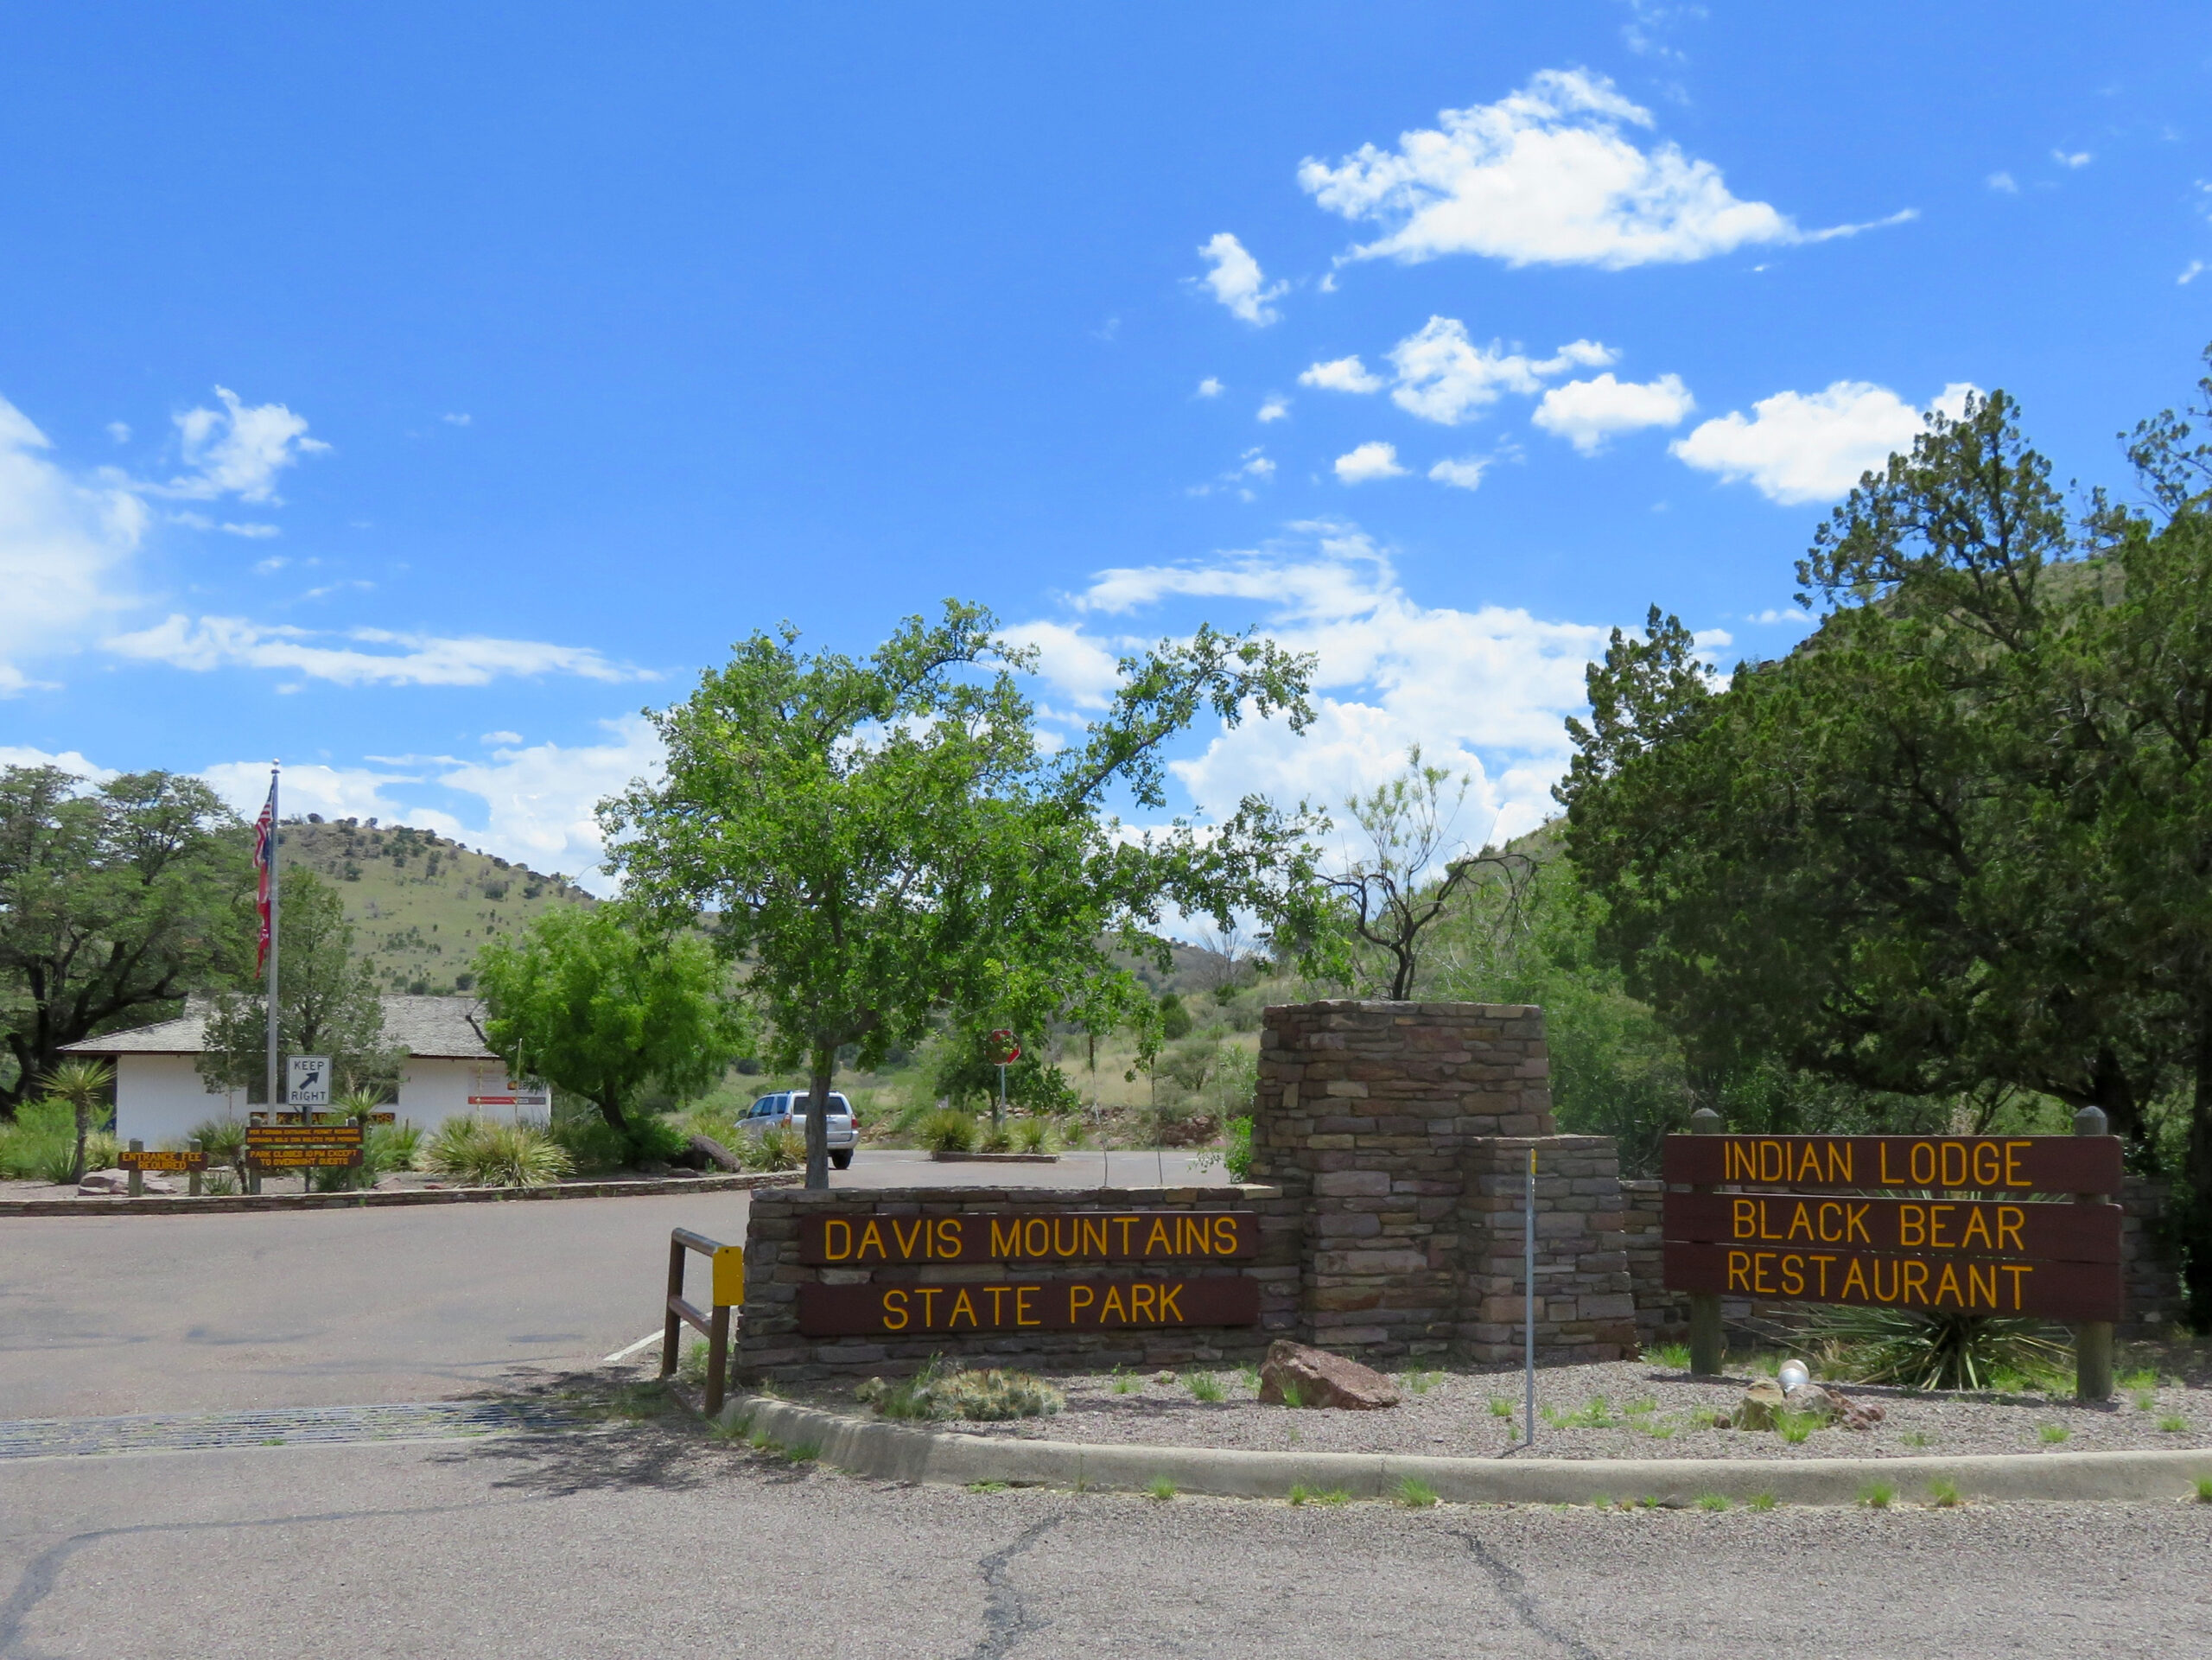 Entrance to Davis Mountains State Park with signage for the Indian Lodge Black Bear Restaurant, surrounded by trees and hills under a blue sky with clouds.